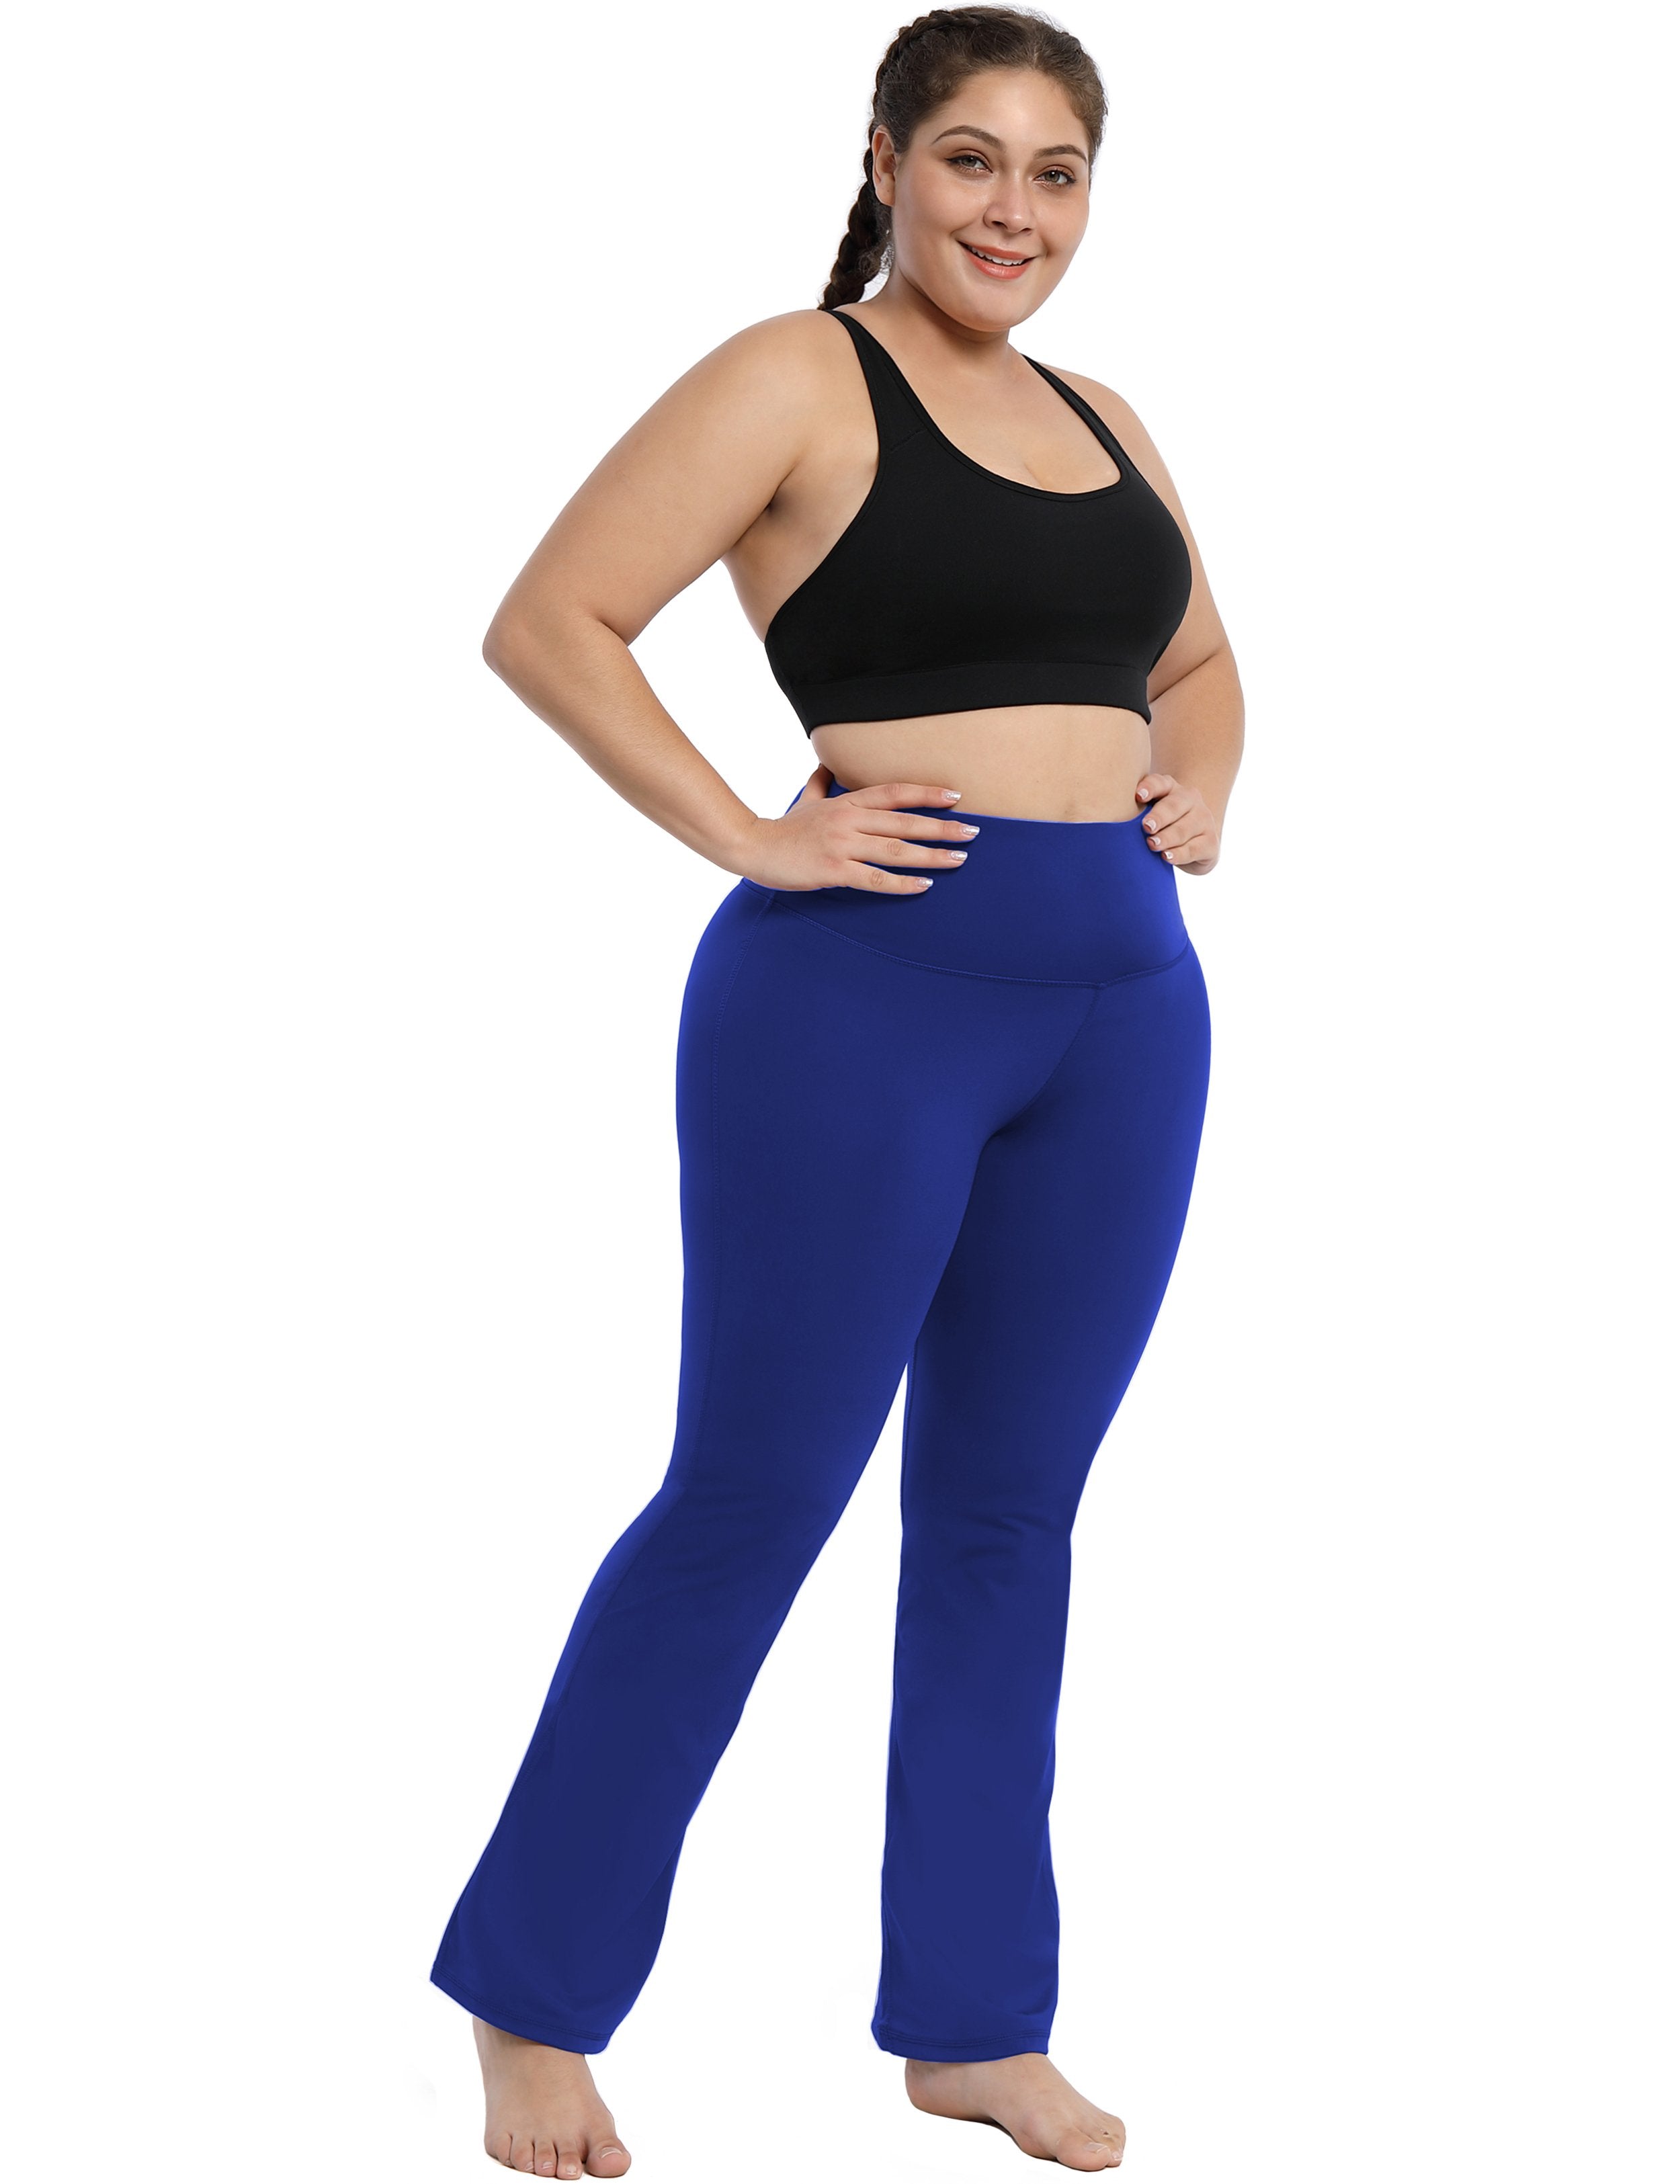 High Waist Bootcut Leggings Navy 75%Nylon/25%Spandex Fabric doesn't attract lint easily 4-way stretch No see-through Moisture-wicking Tummy control Inner pocket Five lengths